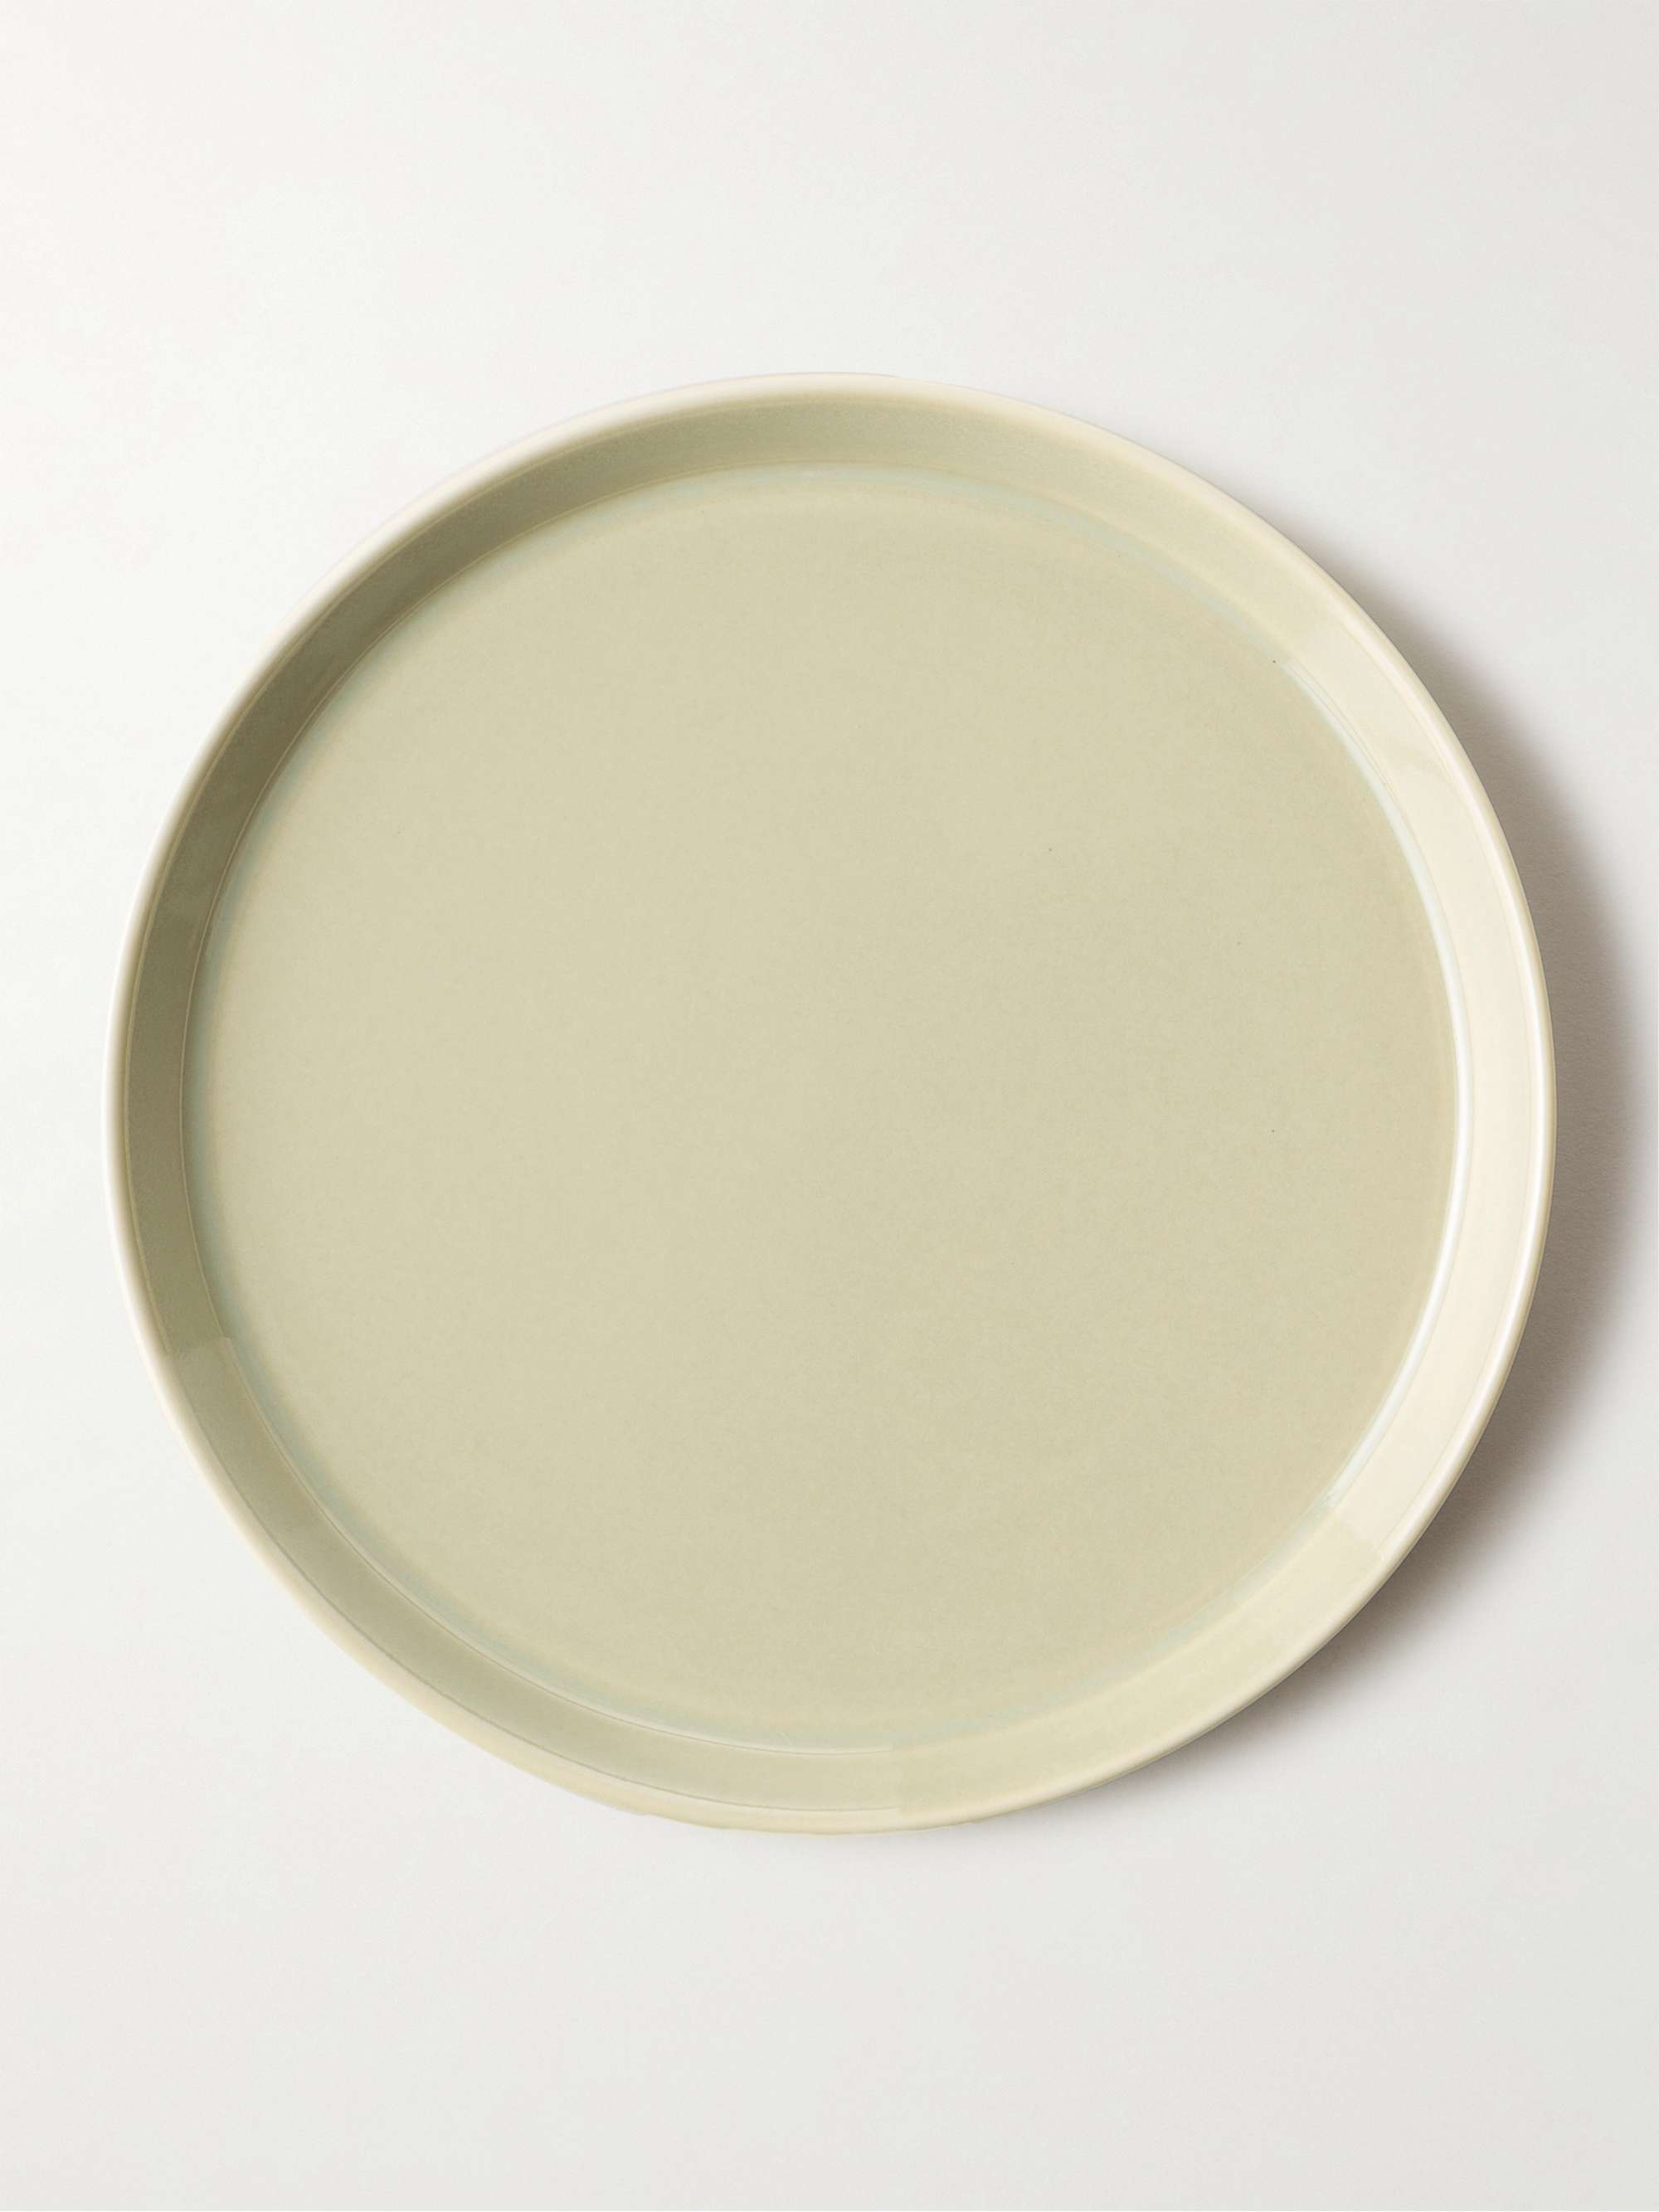 BY JAPAN + Maruhiro + Hasimi Set of Two Porcelain Plates